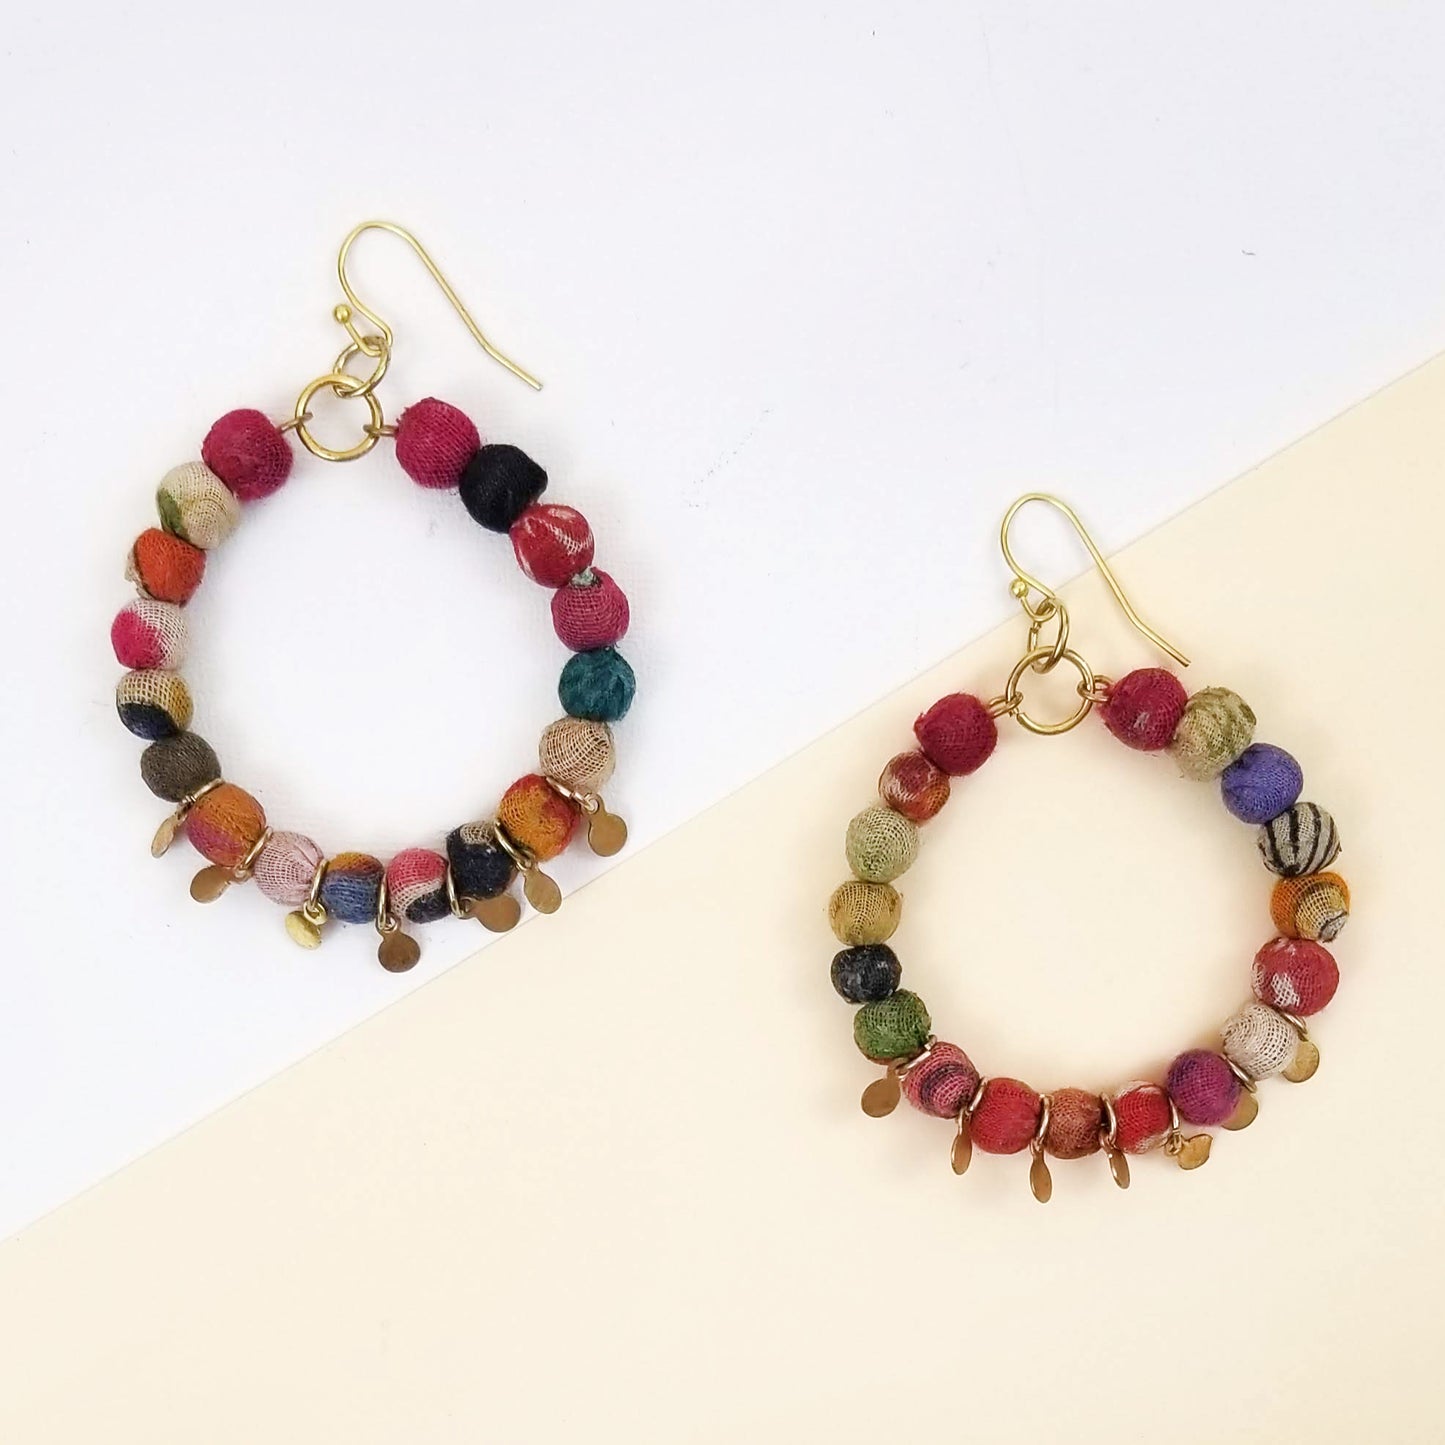 Recycled Kantha Textile Bead Hoops with Metal Discs Fair Trade Earrings